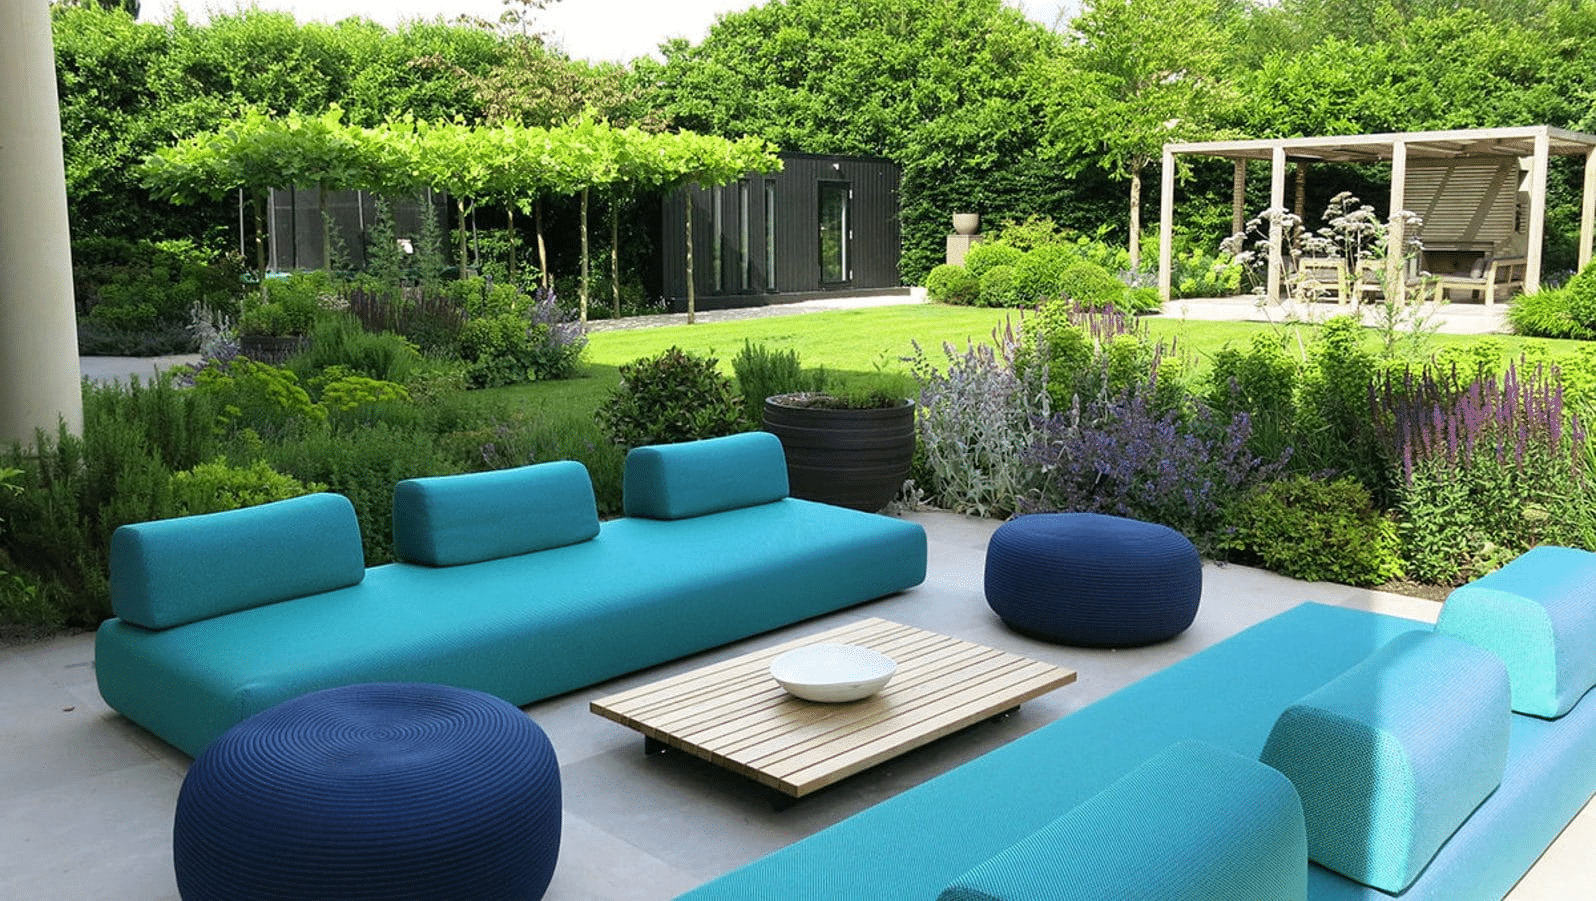 Outdoor garden with seating area